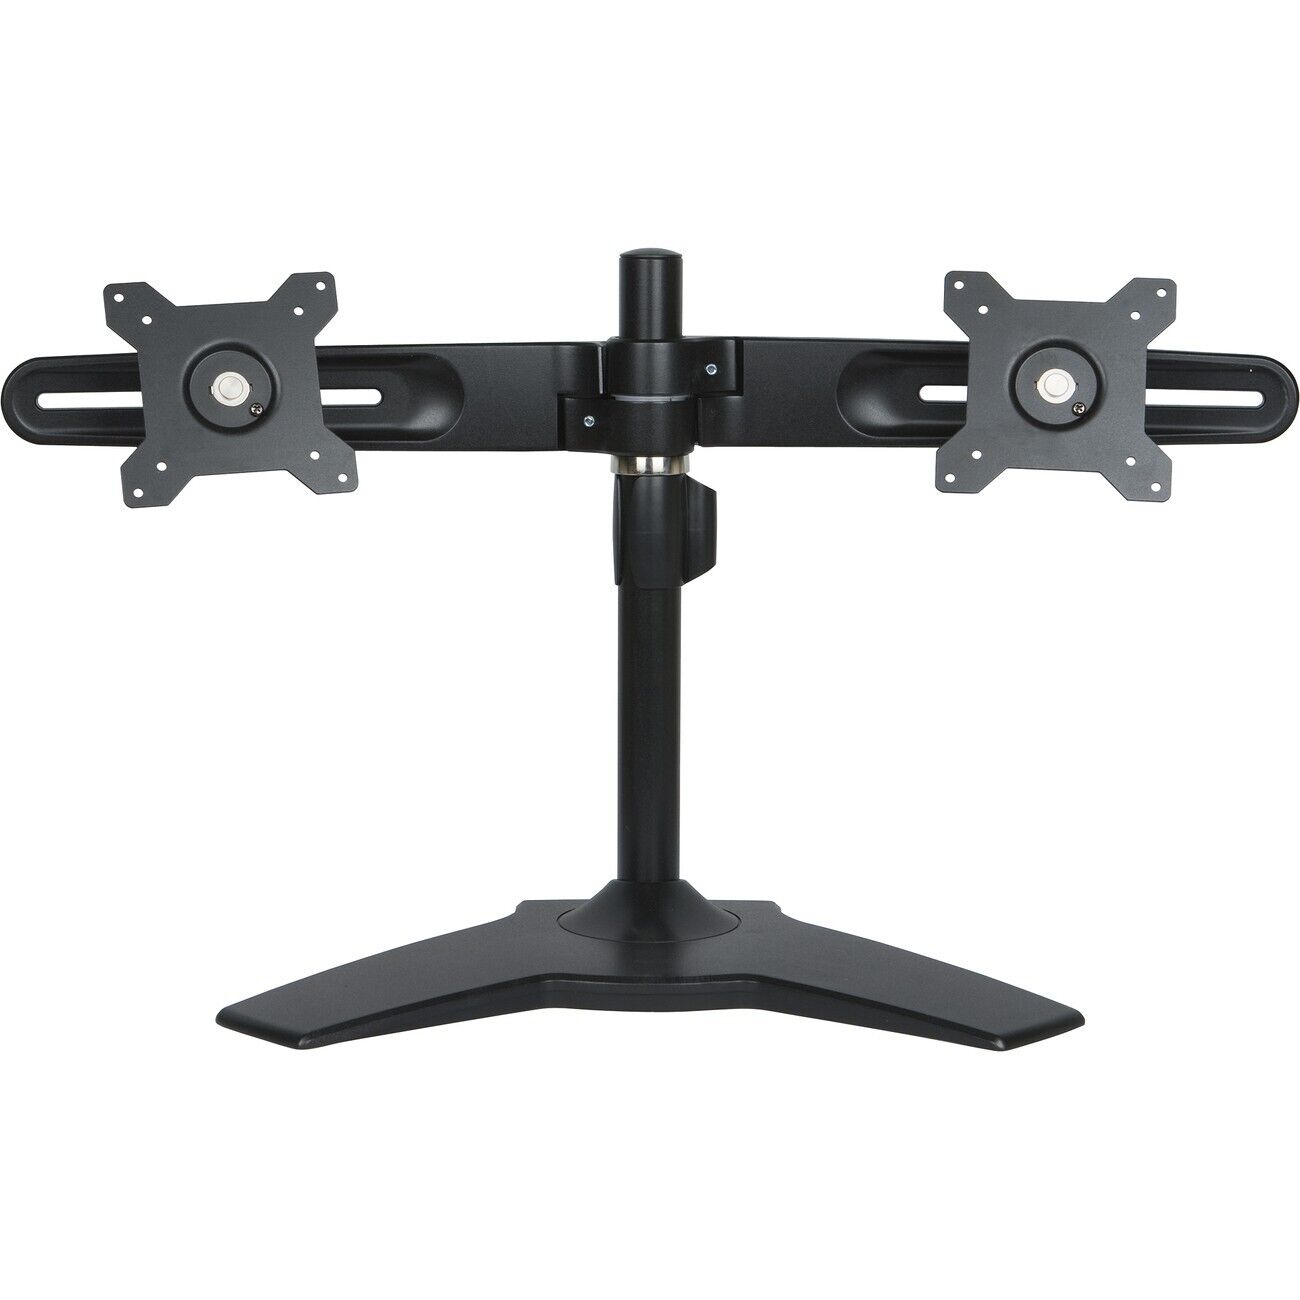 Planar 997-5253-00 AS2 Black Dual Monitor Stand - Up to 66lb - Up to 24" LCD